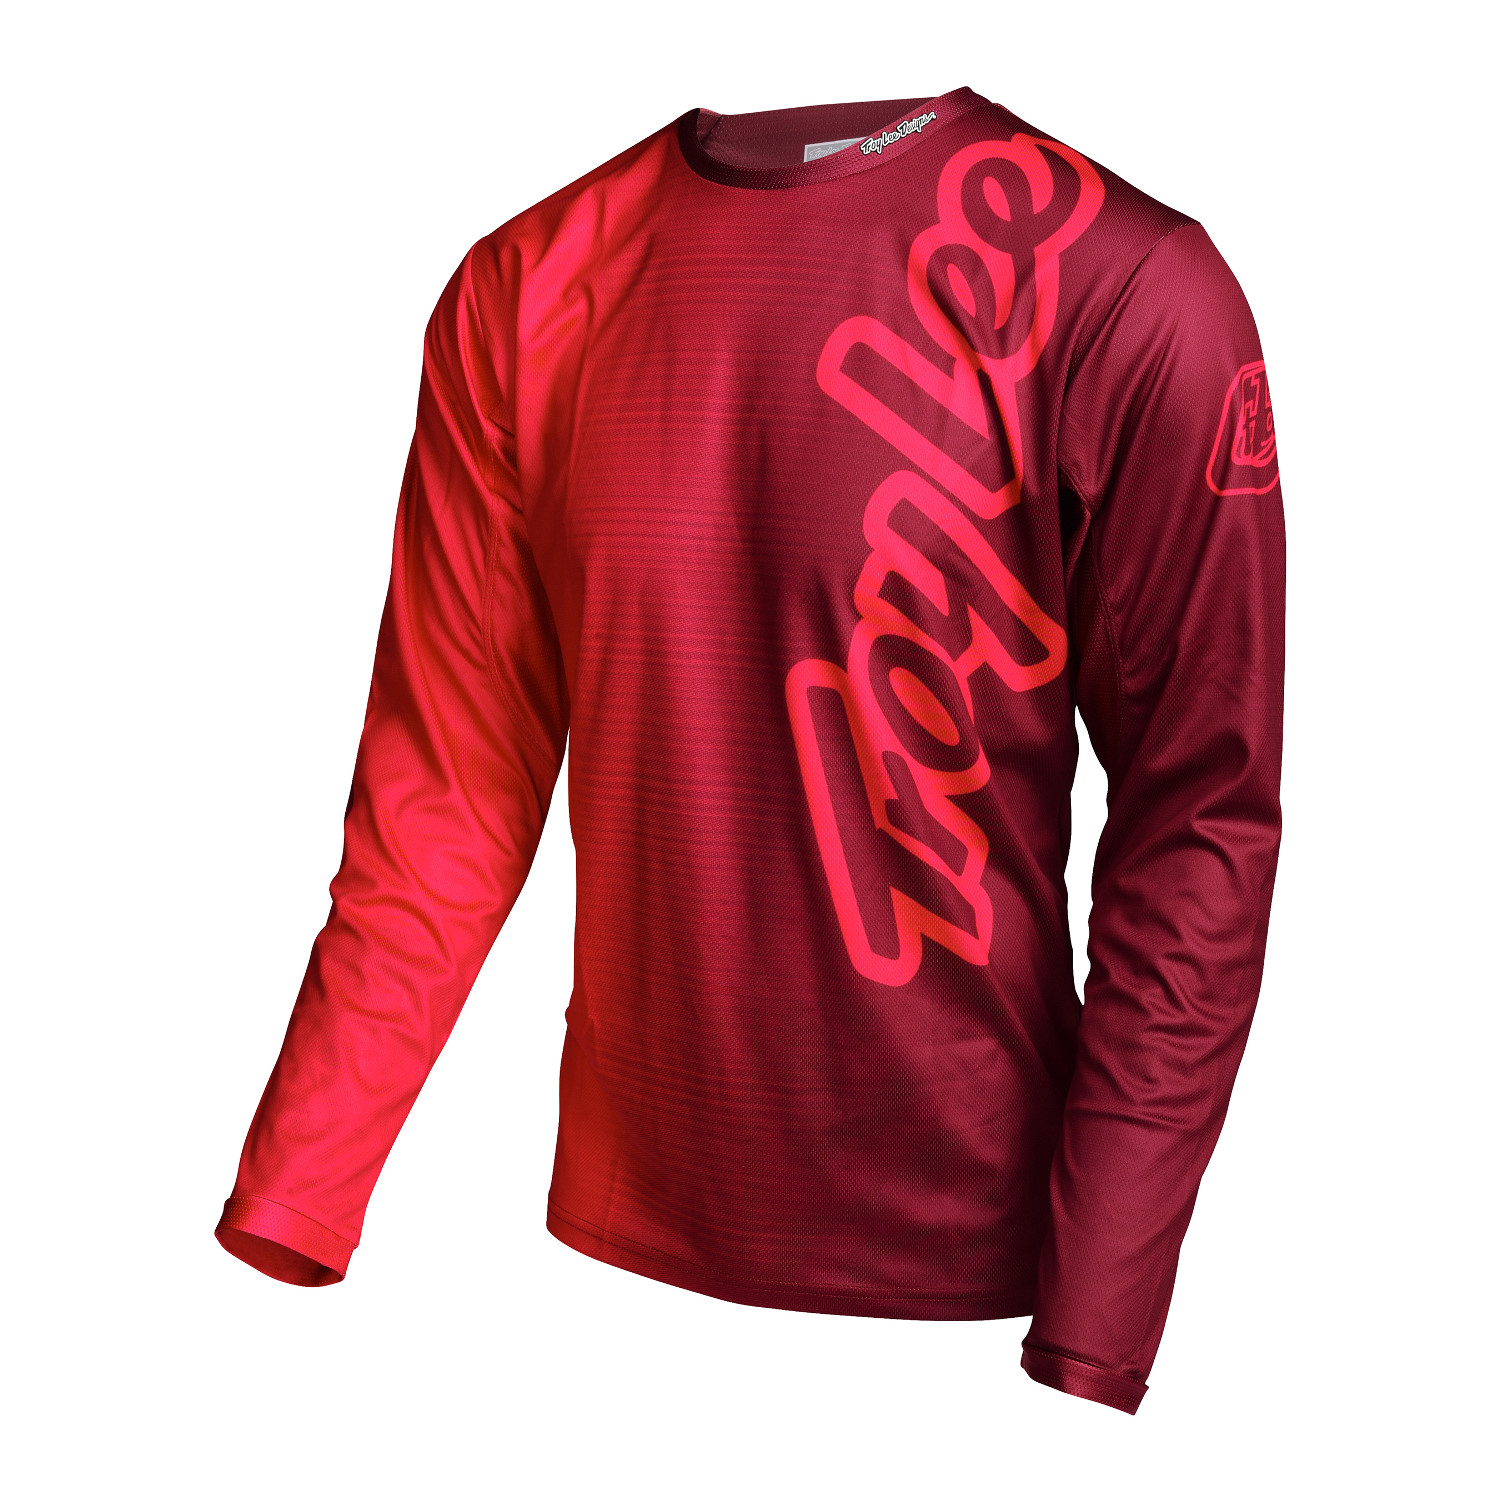 Troy Lee Designs Downhill Jersey Sprint 50/50 - Red